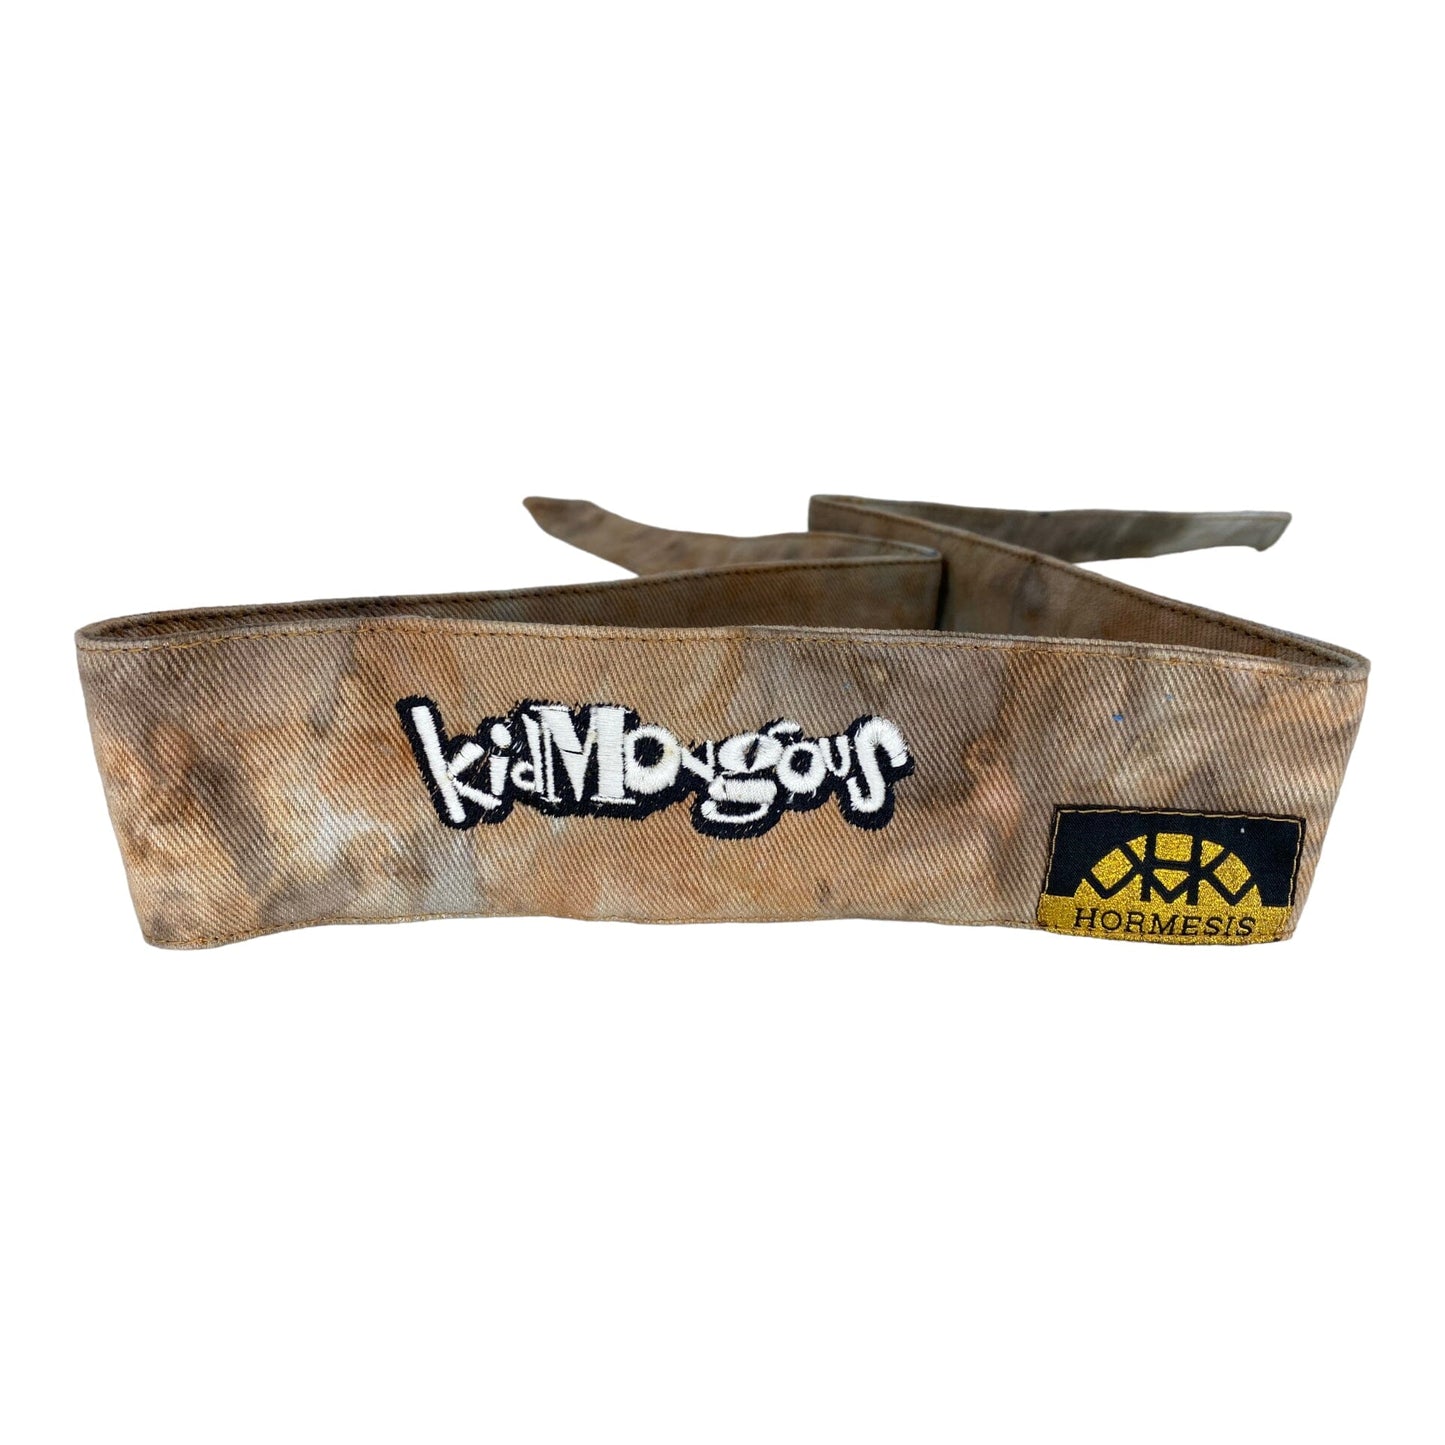 Used Hormesis Headband - The Kidmongous Series - The Blockbuster (129/177) Paintball Gun from CPXBrosPaintball Buy/Sell/Trade Paintball Markers, Paintball Hoppers, Paintball Masks, and Hormesis Headbands